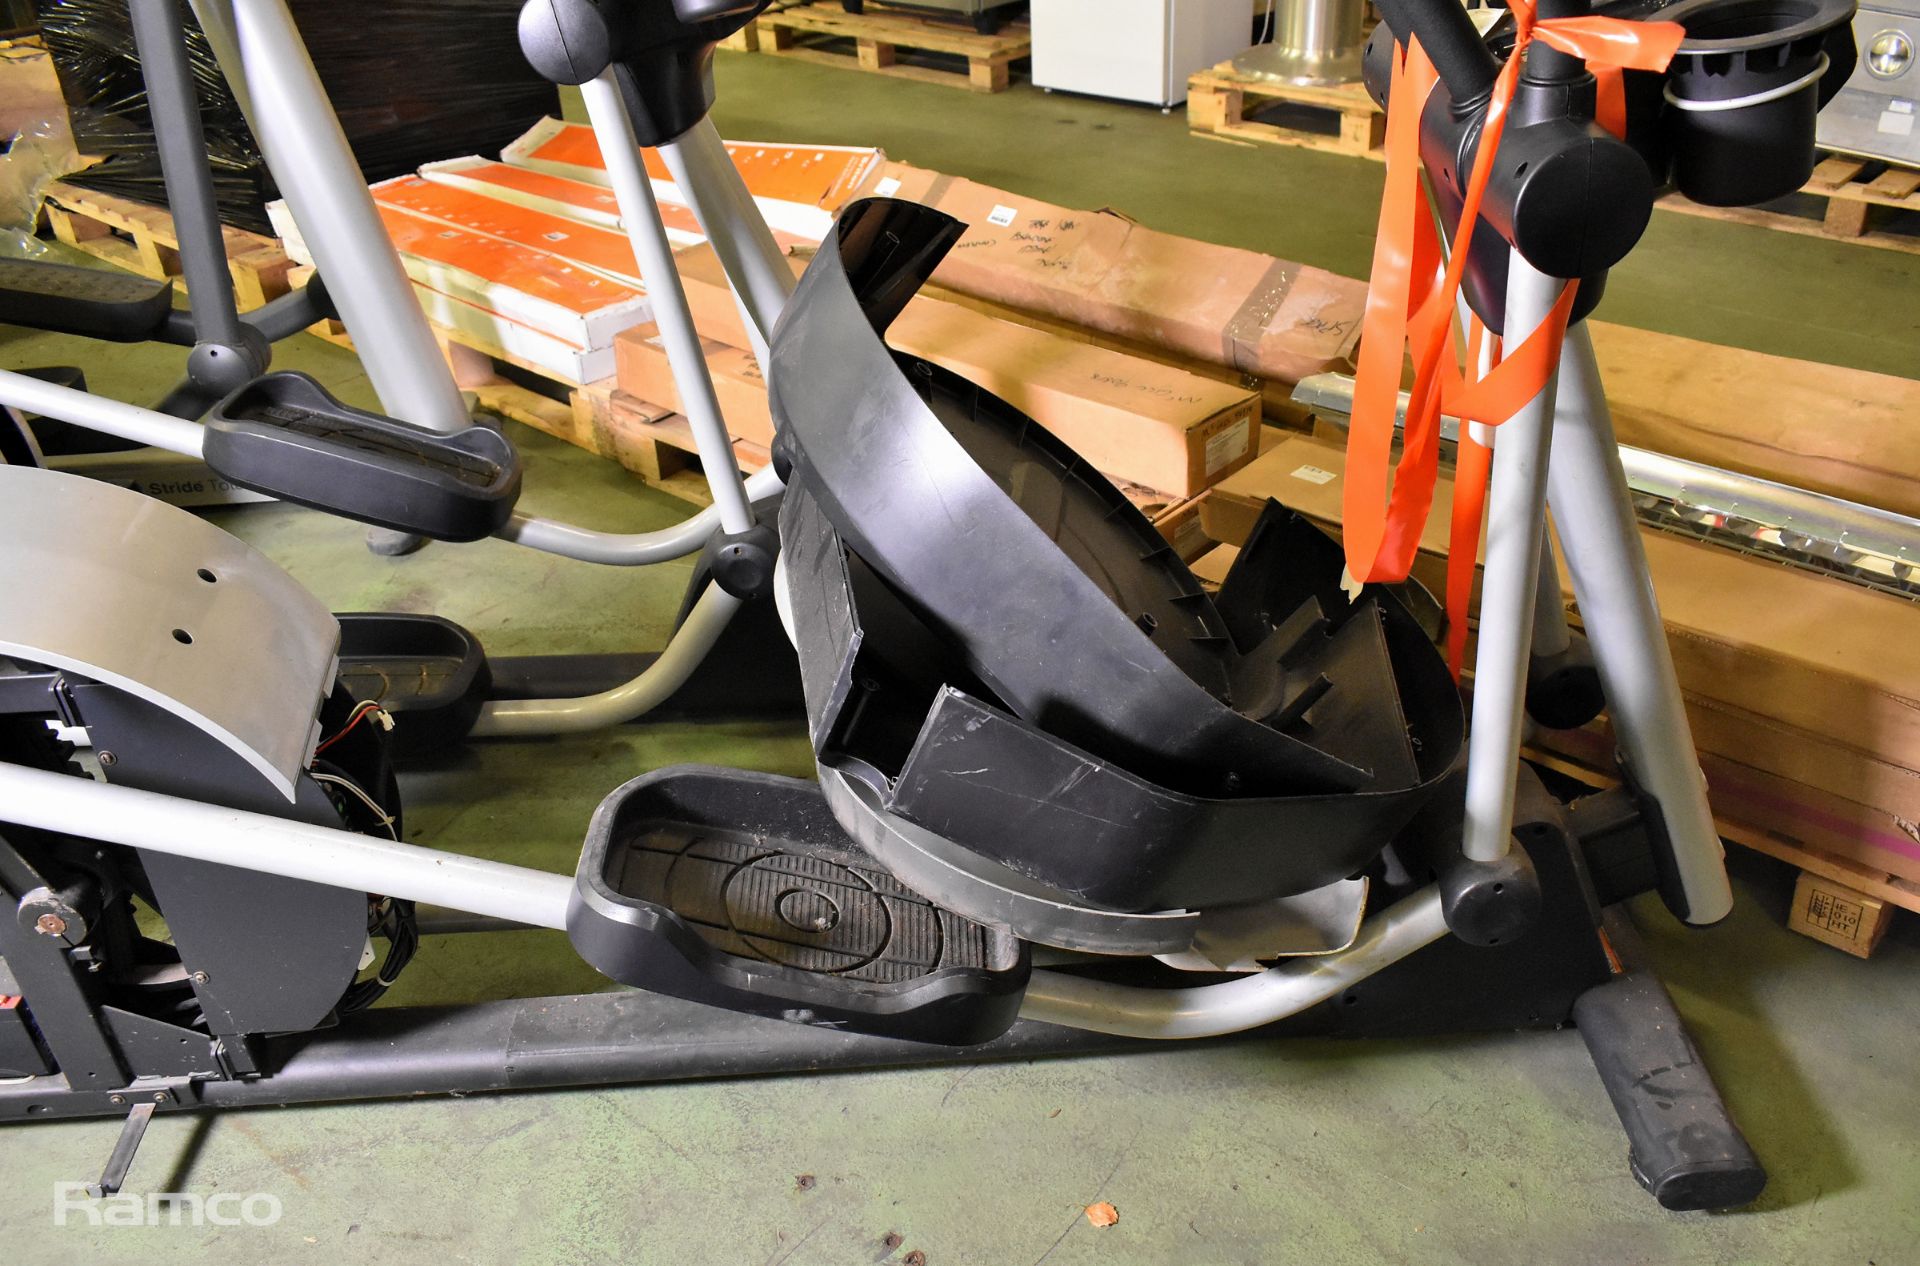 Pulse Fitness X-Train cross trainer - L 220 x W 75 x H 160cm - IN NEED OR REPAIR - Image 3 of 8